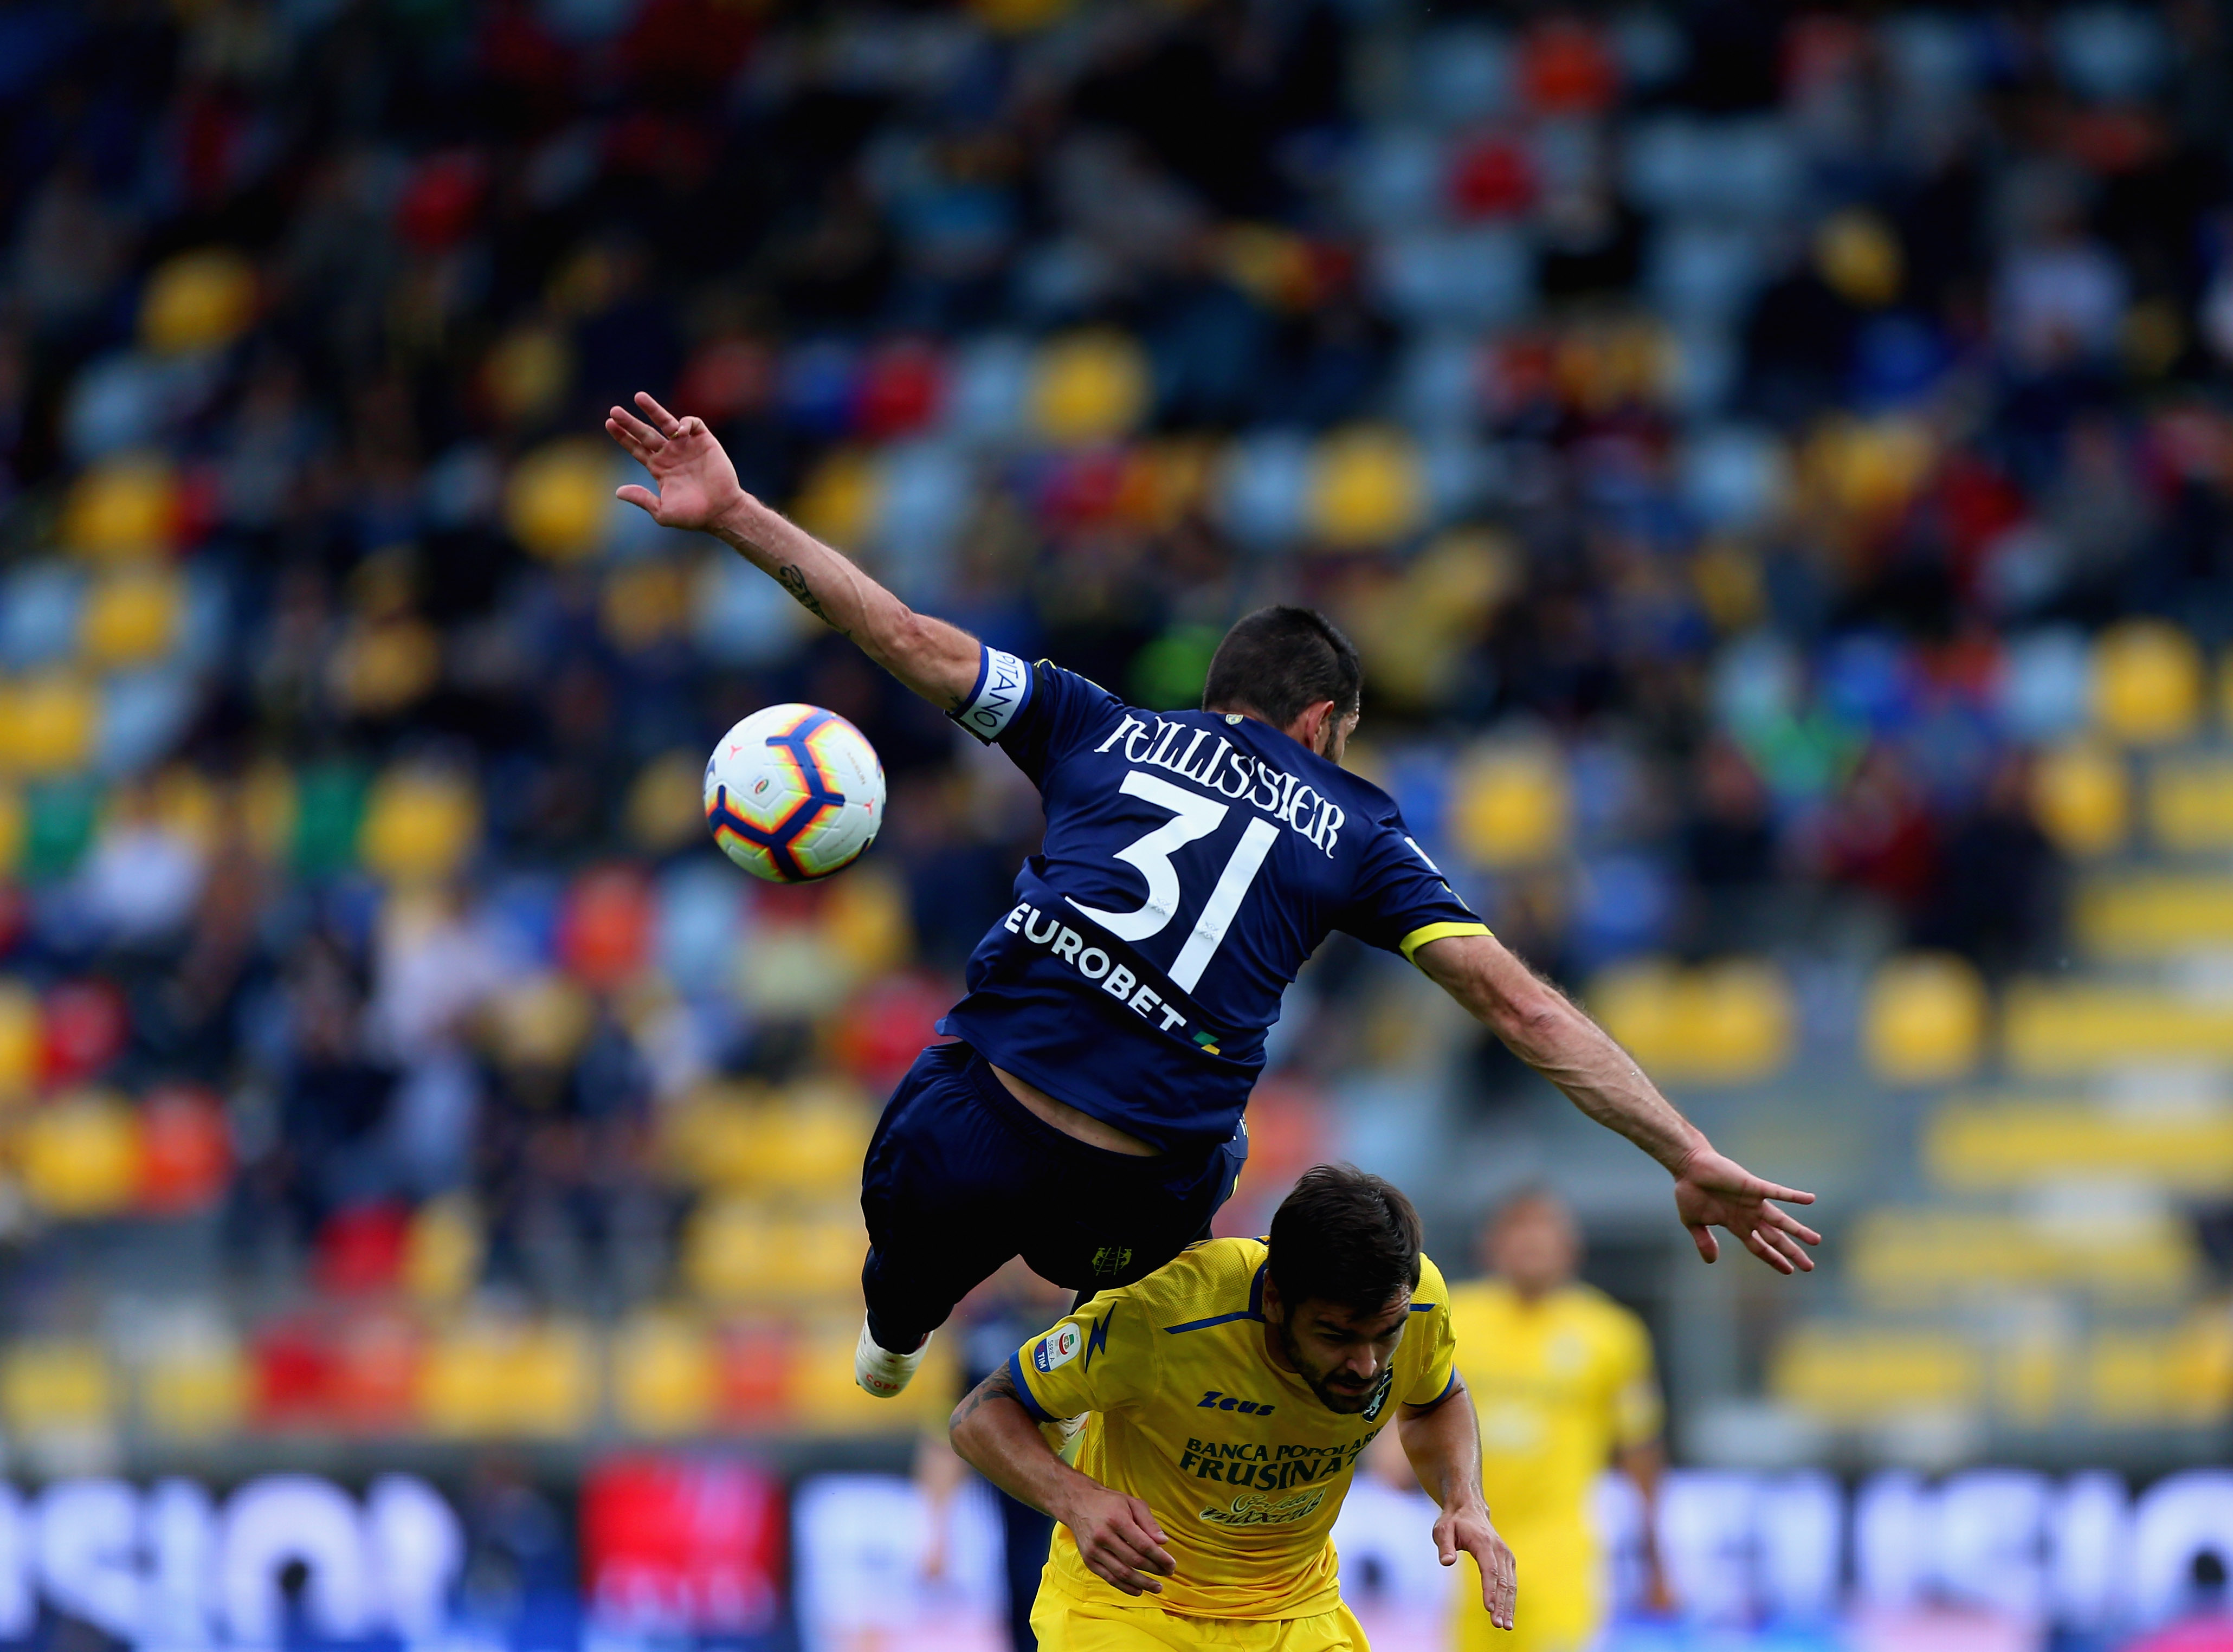 FROSINONE, ITALY - MAY 25:  Sergio Pellissier of Chievo Verona competes for the ball with Nicolo' Brighenti of Frosinone Calcio during the Serie A match between Frosinone Calcio and Chievo Verona at Stadio Benito Stirpe on May 25, 2019 in Frosinone, Italy.  (Photo by Paolo Bruno/Getty Images)